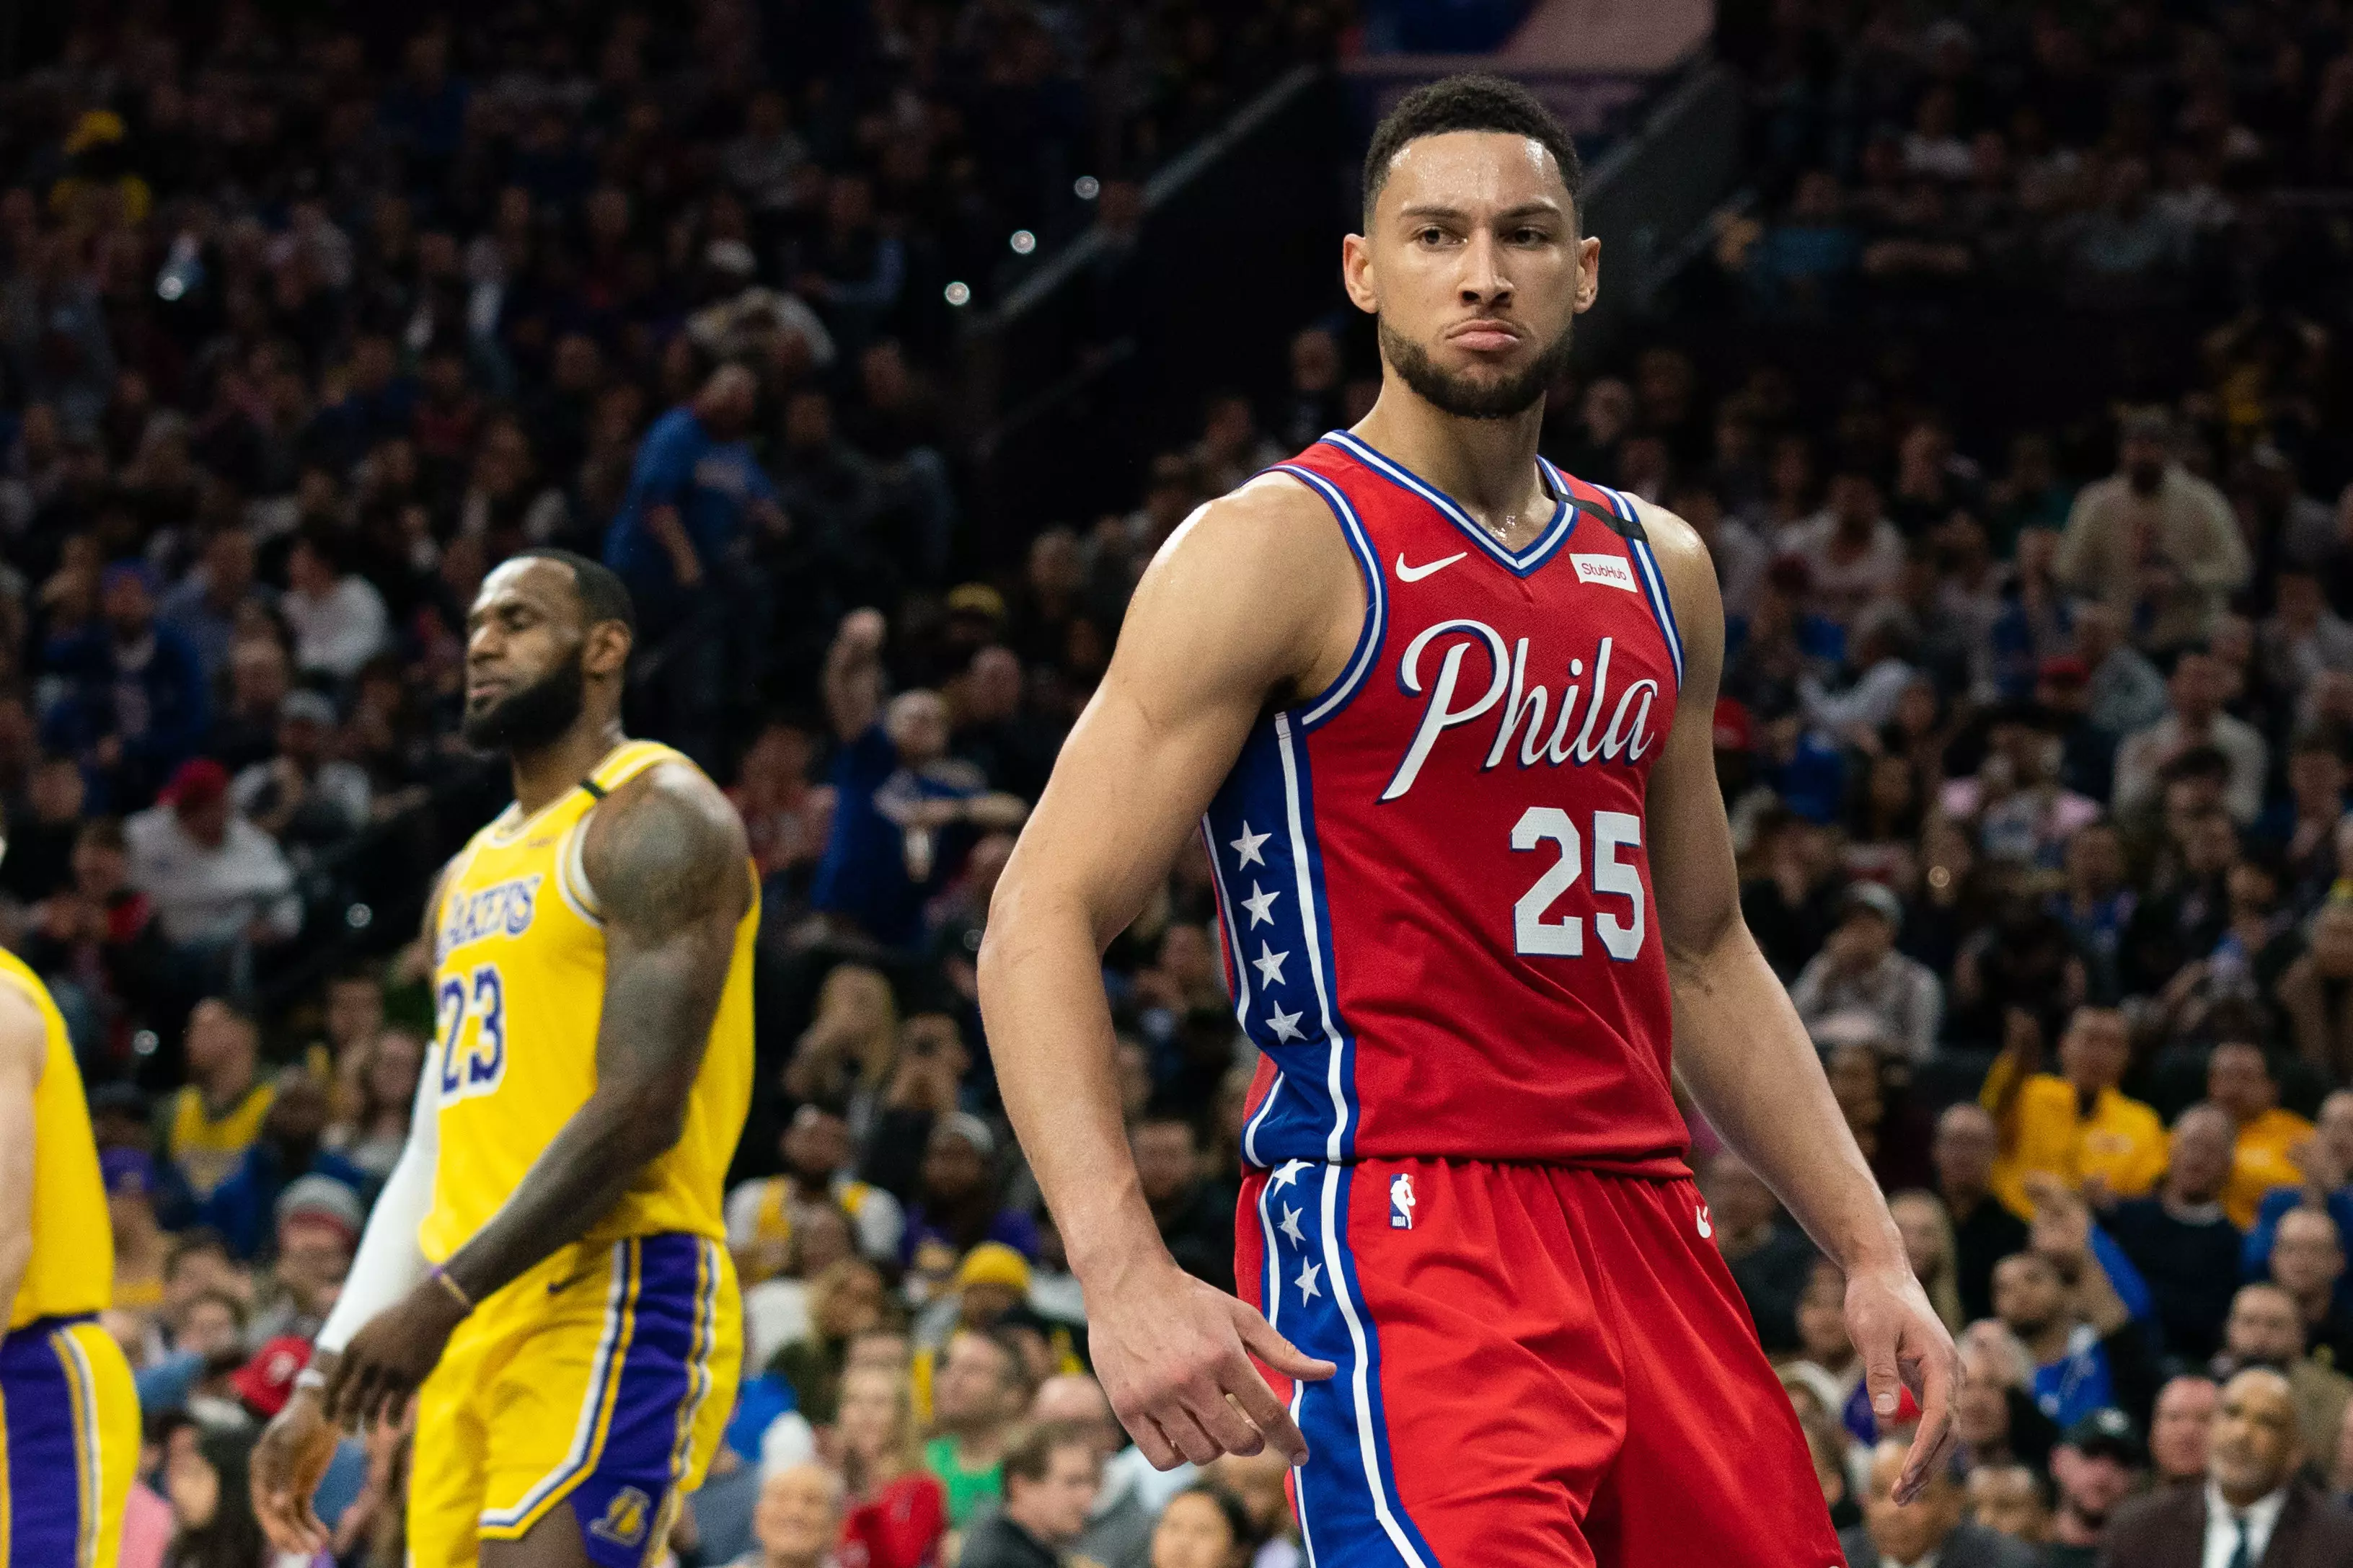 Simmons has been playing power forward during team practices